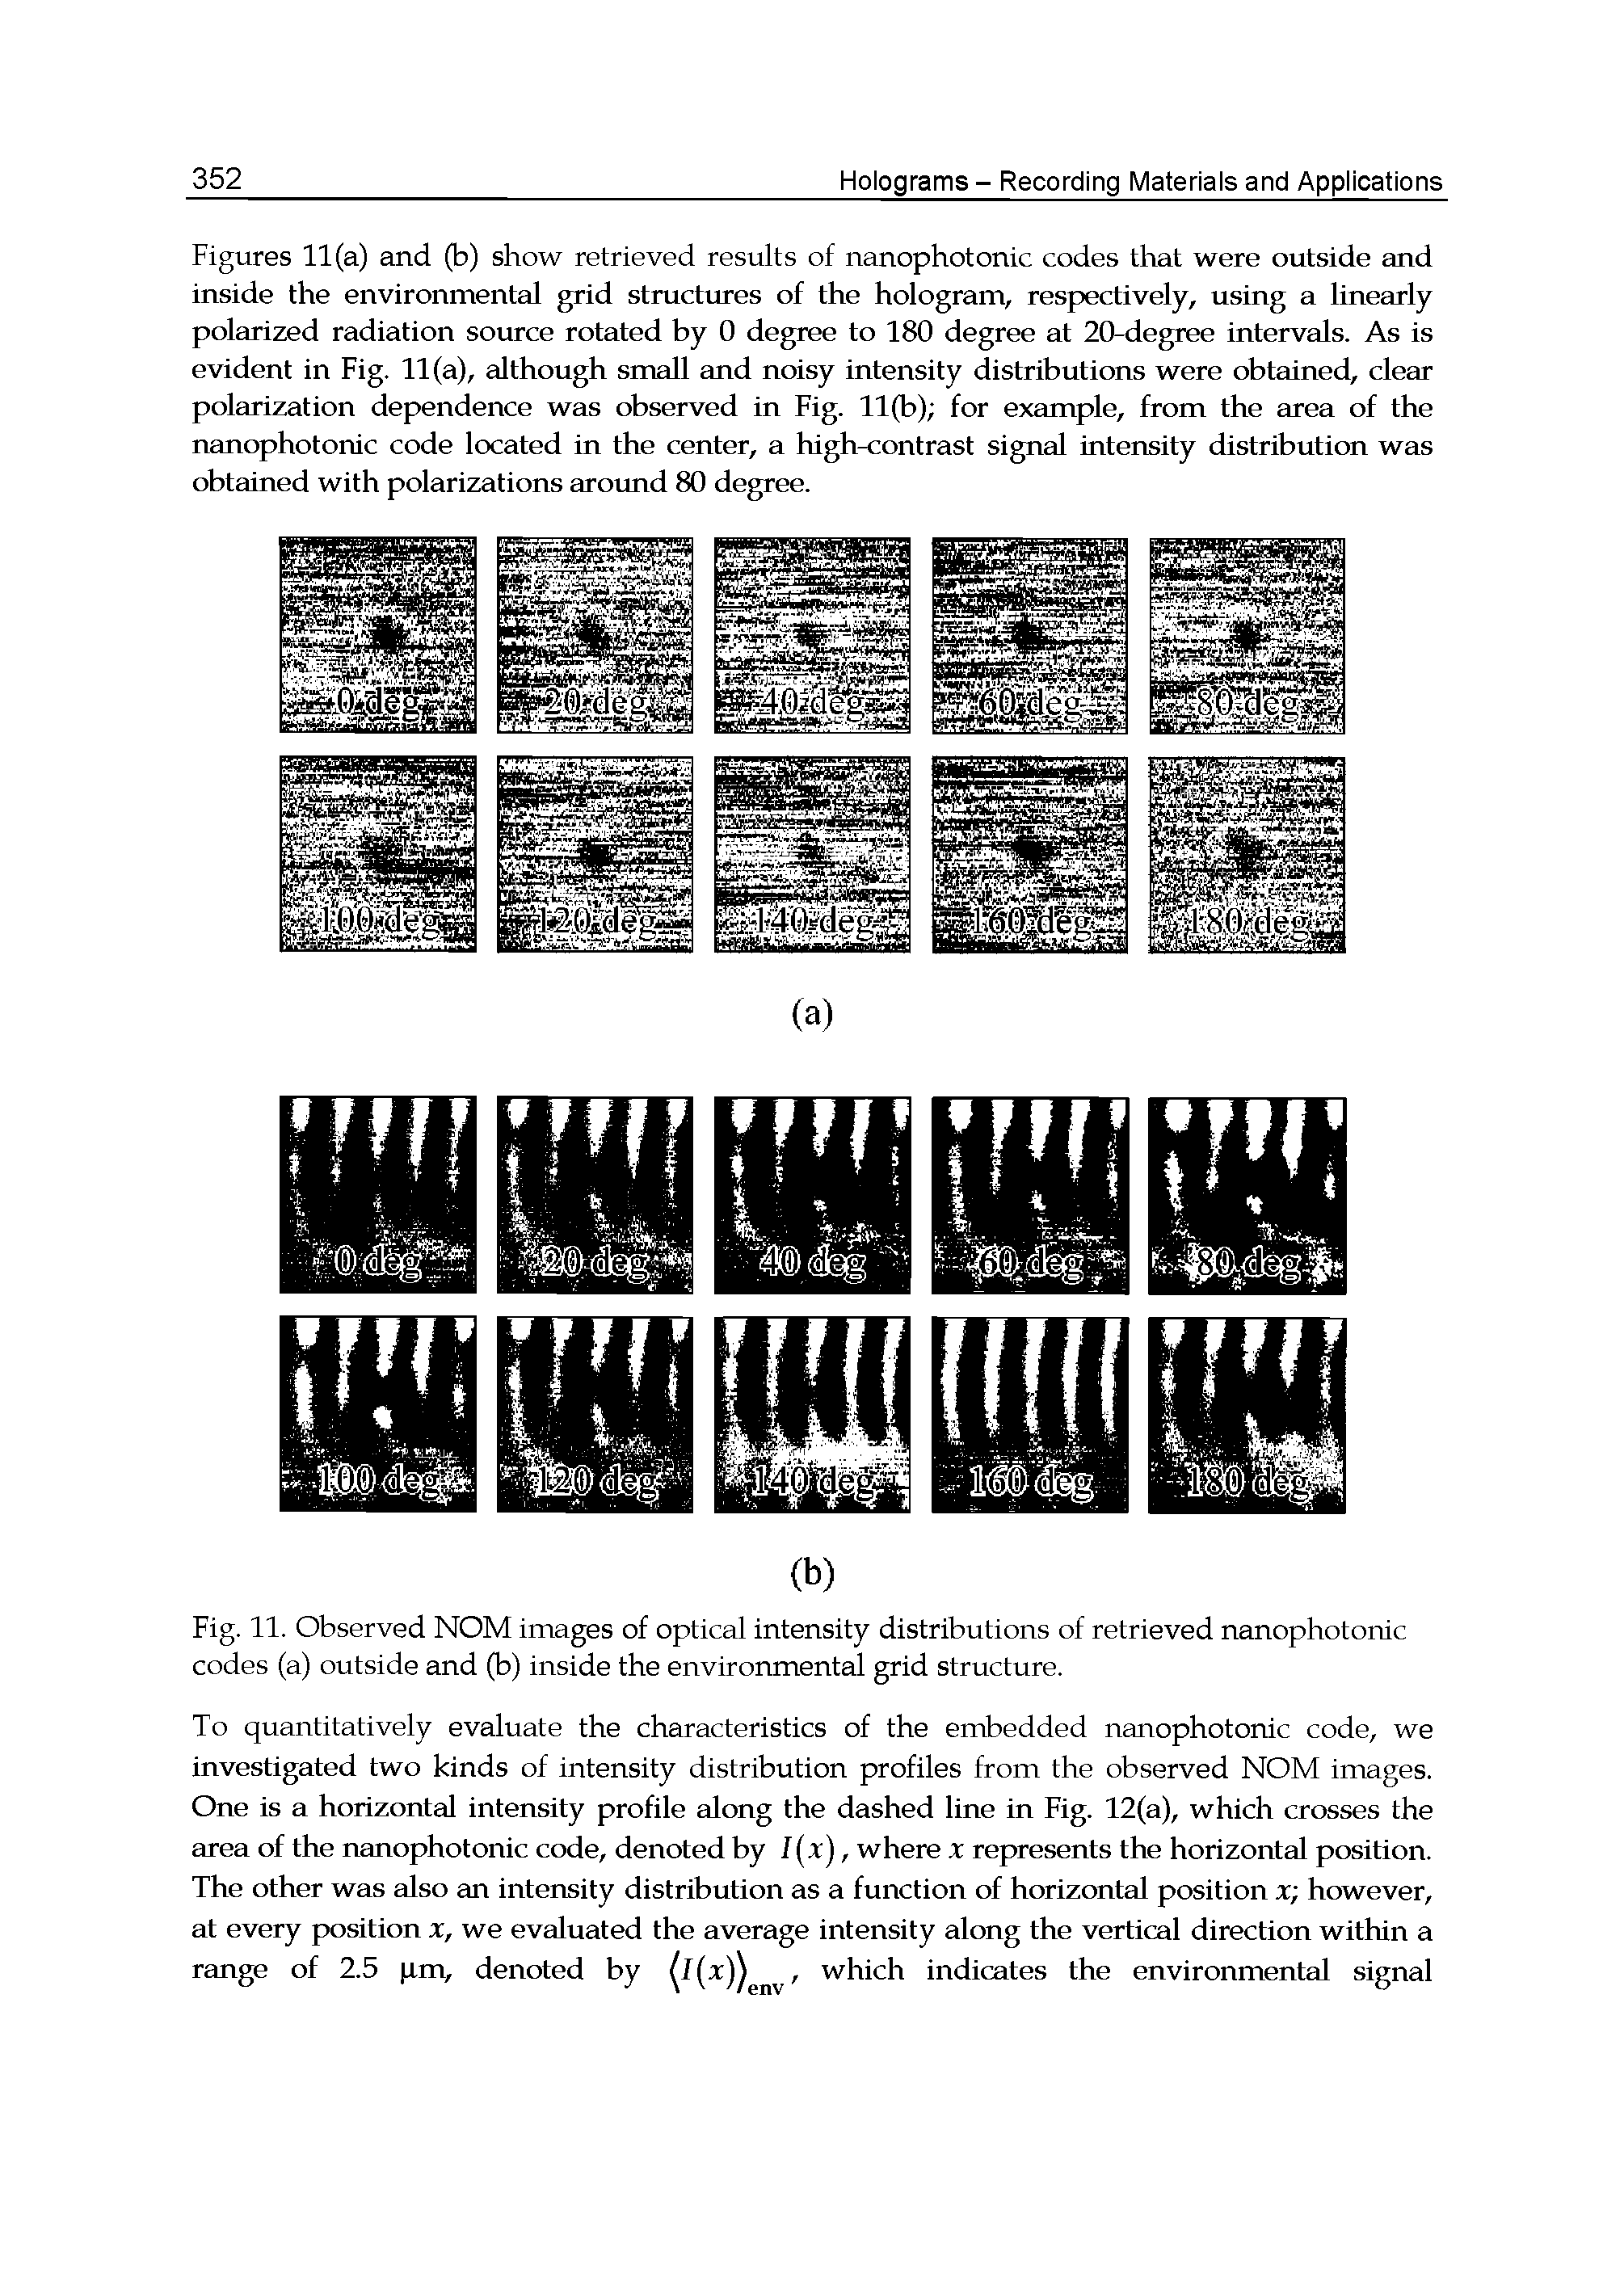 Figures 11(a) and (b) show retrieved results of nanophotonic codes that were outside and inside the environmental grid structures of the hologram, respectively, using a linearly polarized radiation source rotated by 0 degree to 180 degree at 20-degree intervals. As is evident in Fig. 11(a), although small and noisy intensity distributions were obtained, clear polarization dependence was observed in Fig. 11(b) for example, from the area of the nanophotonic code located in the center, a high-contrast signal intensity distribution was obtained with polarizations aroimd 80 degree.